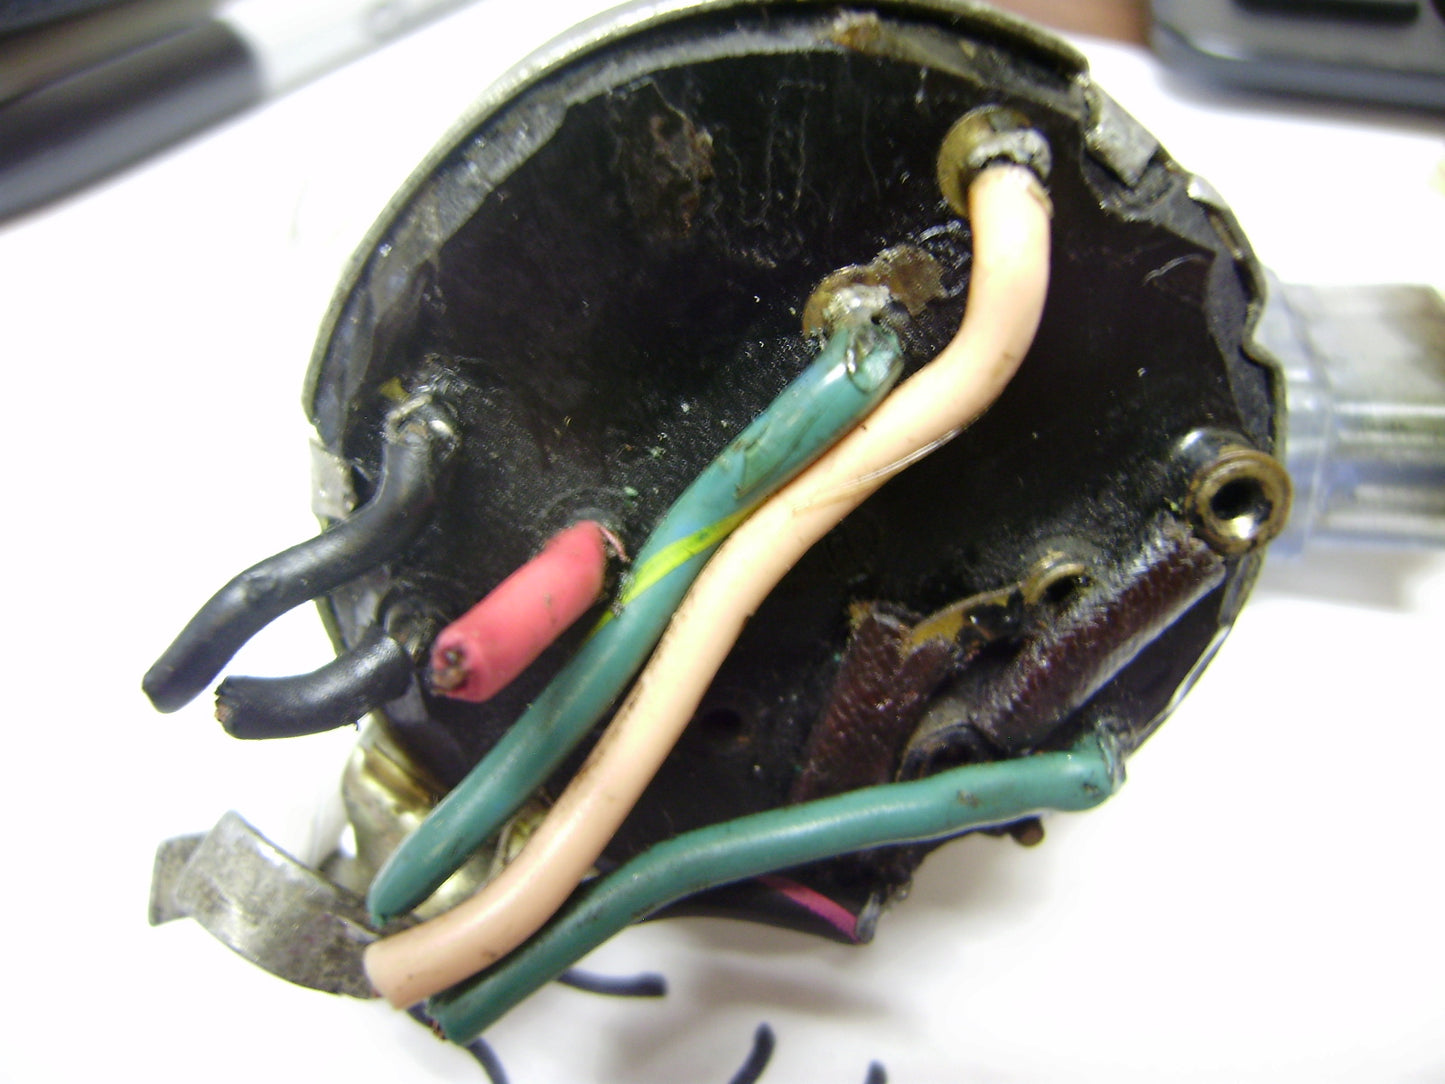 Sold Ebay 11/9/20 Honda CA77 CA72 Dream  Ignition Switch , Wiring  6 Pin Connector needs repair 5455